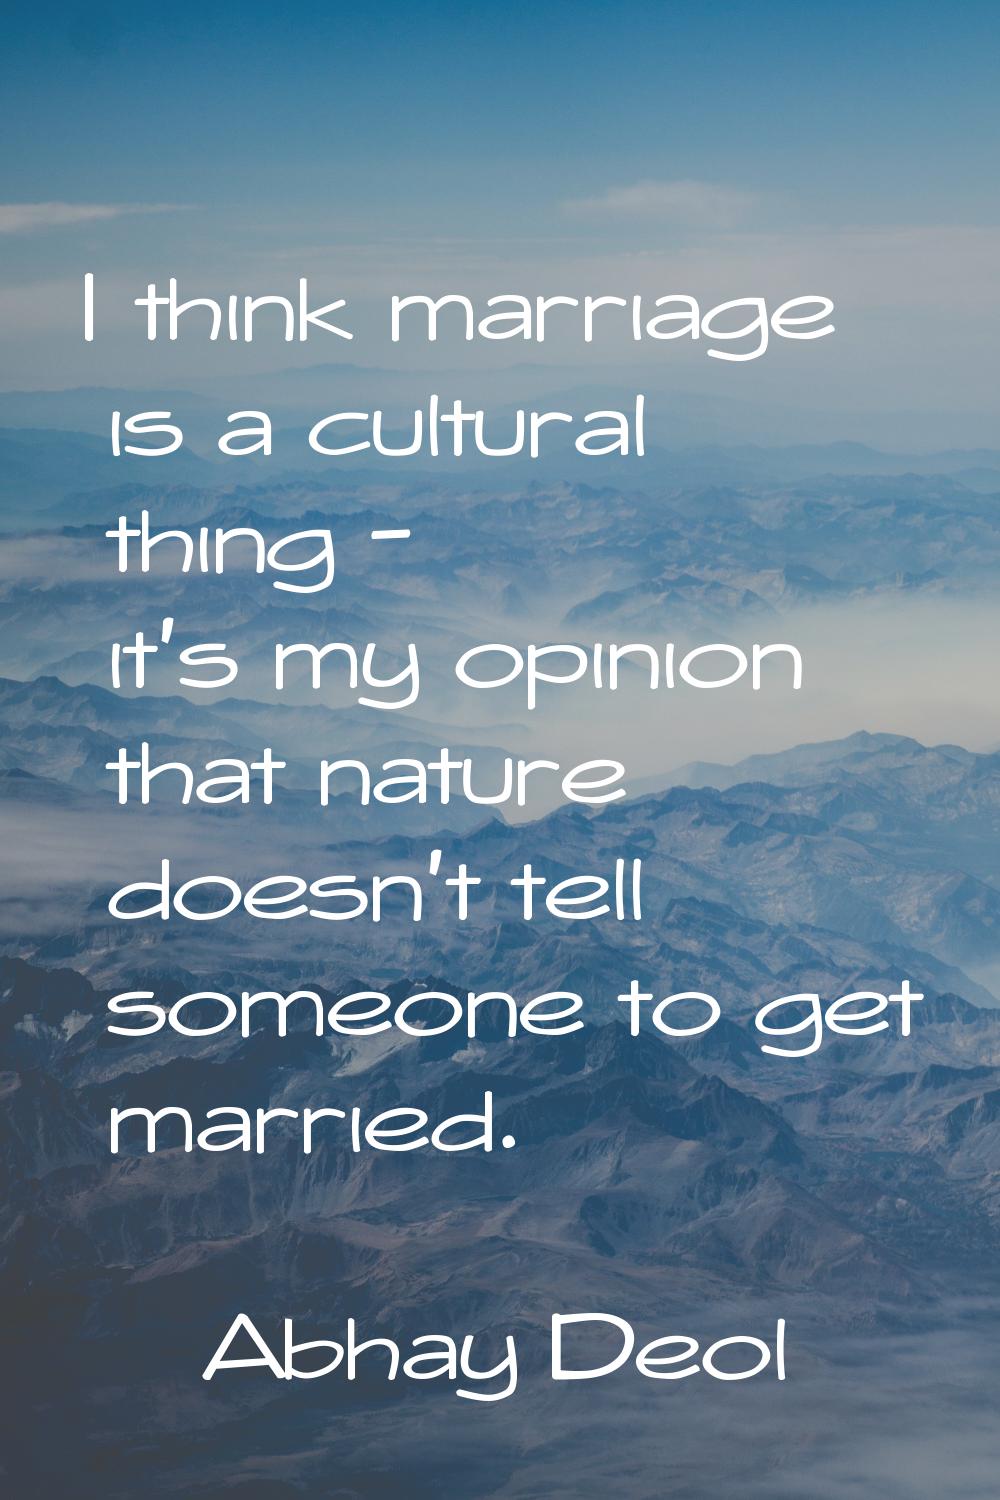 I think marriage is a cultural thing - it's my opinion that nature doesn't tell someone to get marr